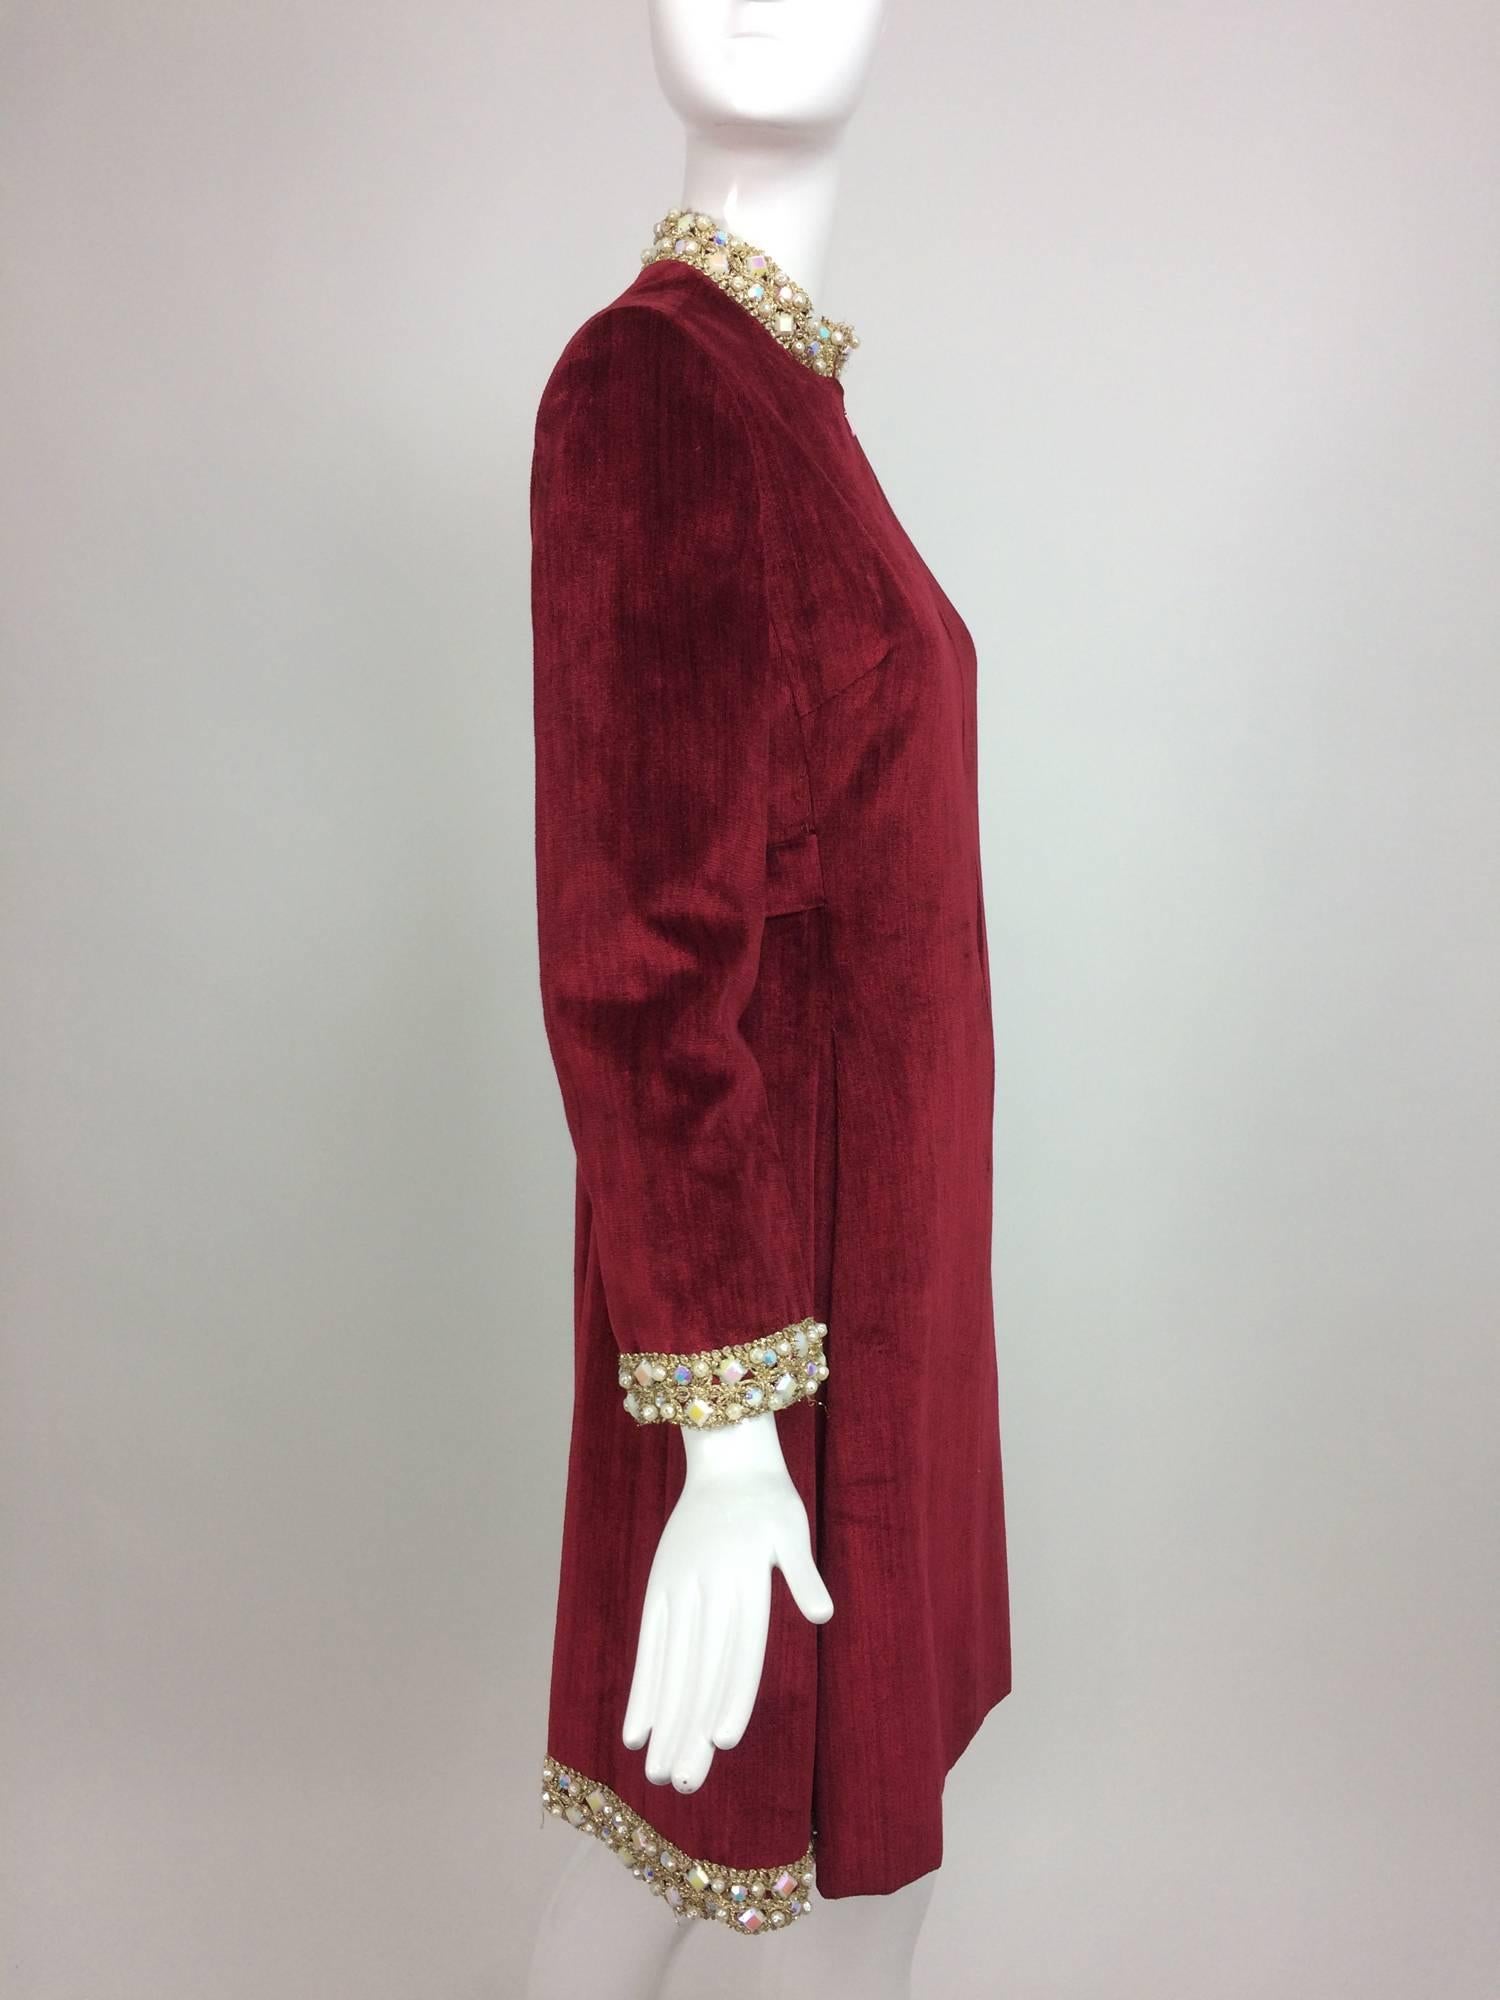 Garnet red silky cotton velvet, jewel trim Mod dress 1960s...Gold cord and jewels at the stand up neckline, cuffs and sides & back of the hem...The dress has a hidden zipper at the front and closes with hook and eyes at the neck front...Long sleeves